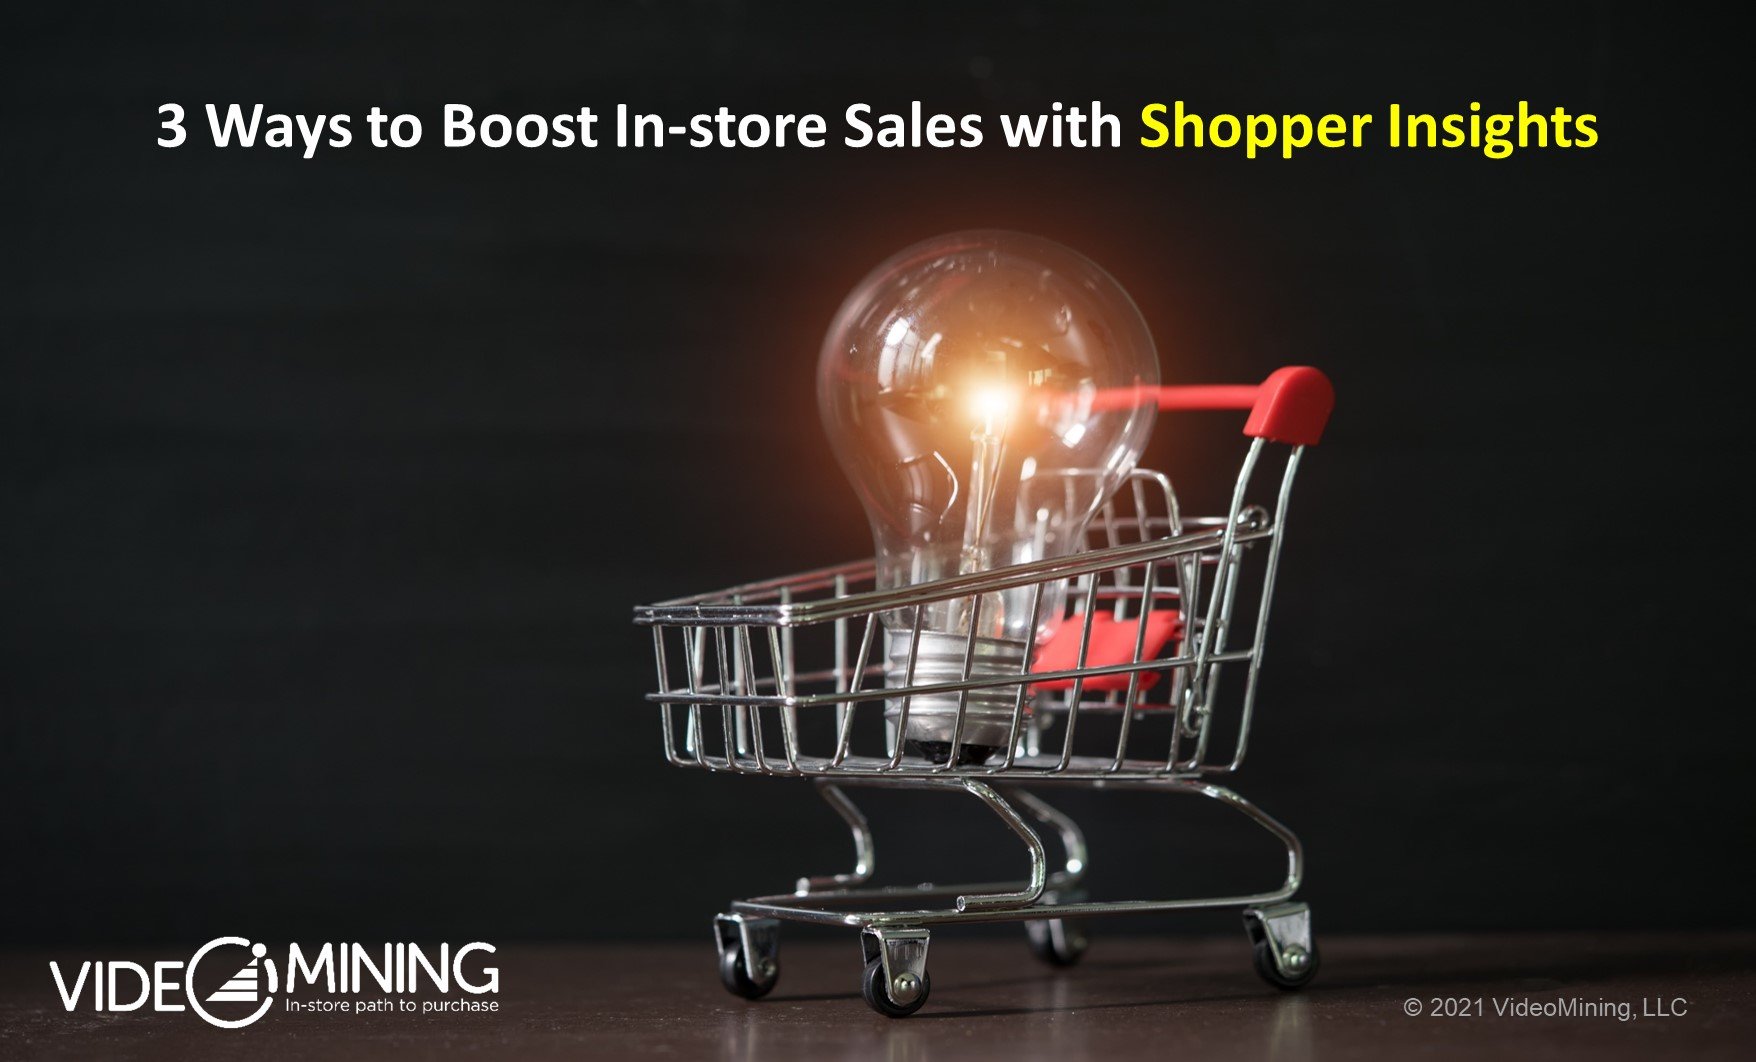 Three ways to boost in-store sales using shopper insights